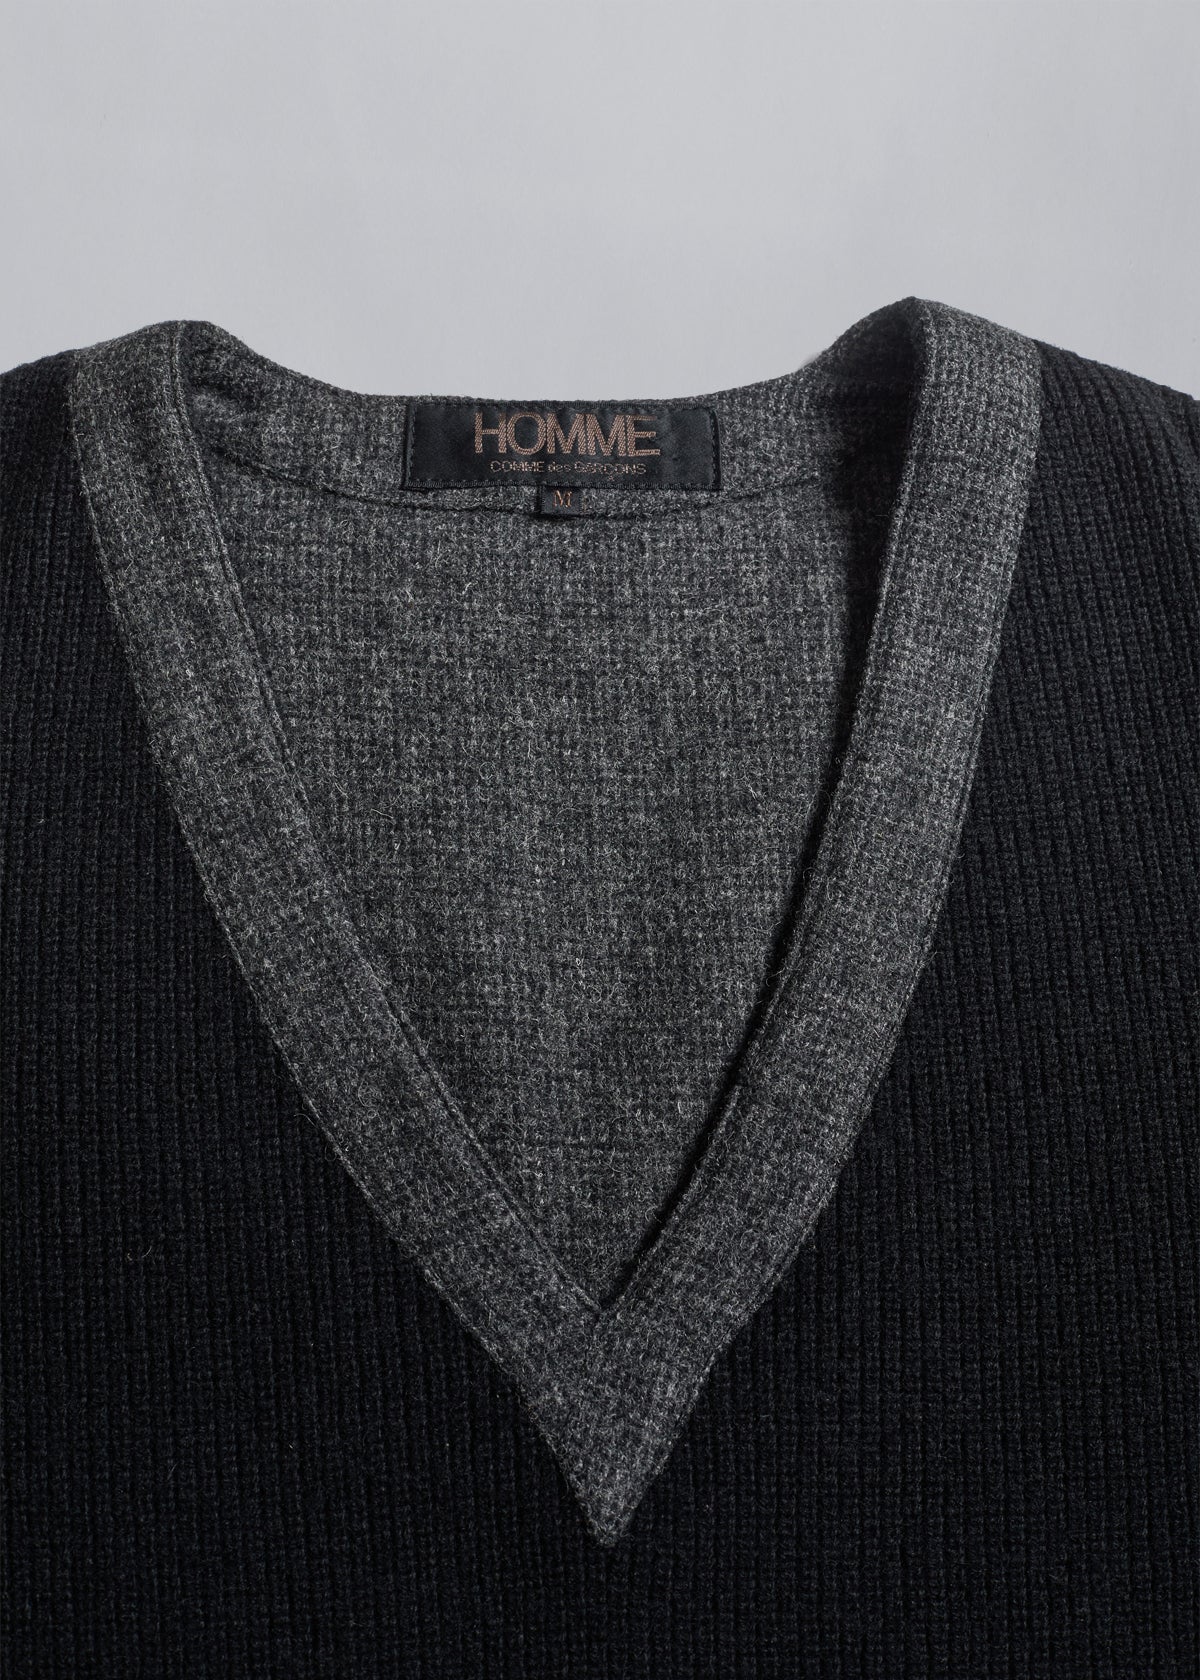 Homme Two Tones V Neck Sweater 1980's - Medium - The Archivist Store